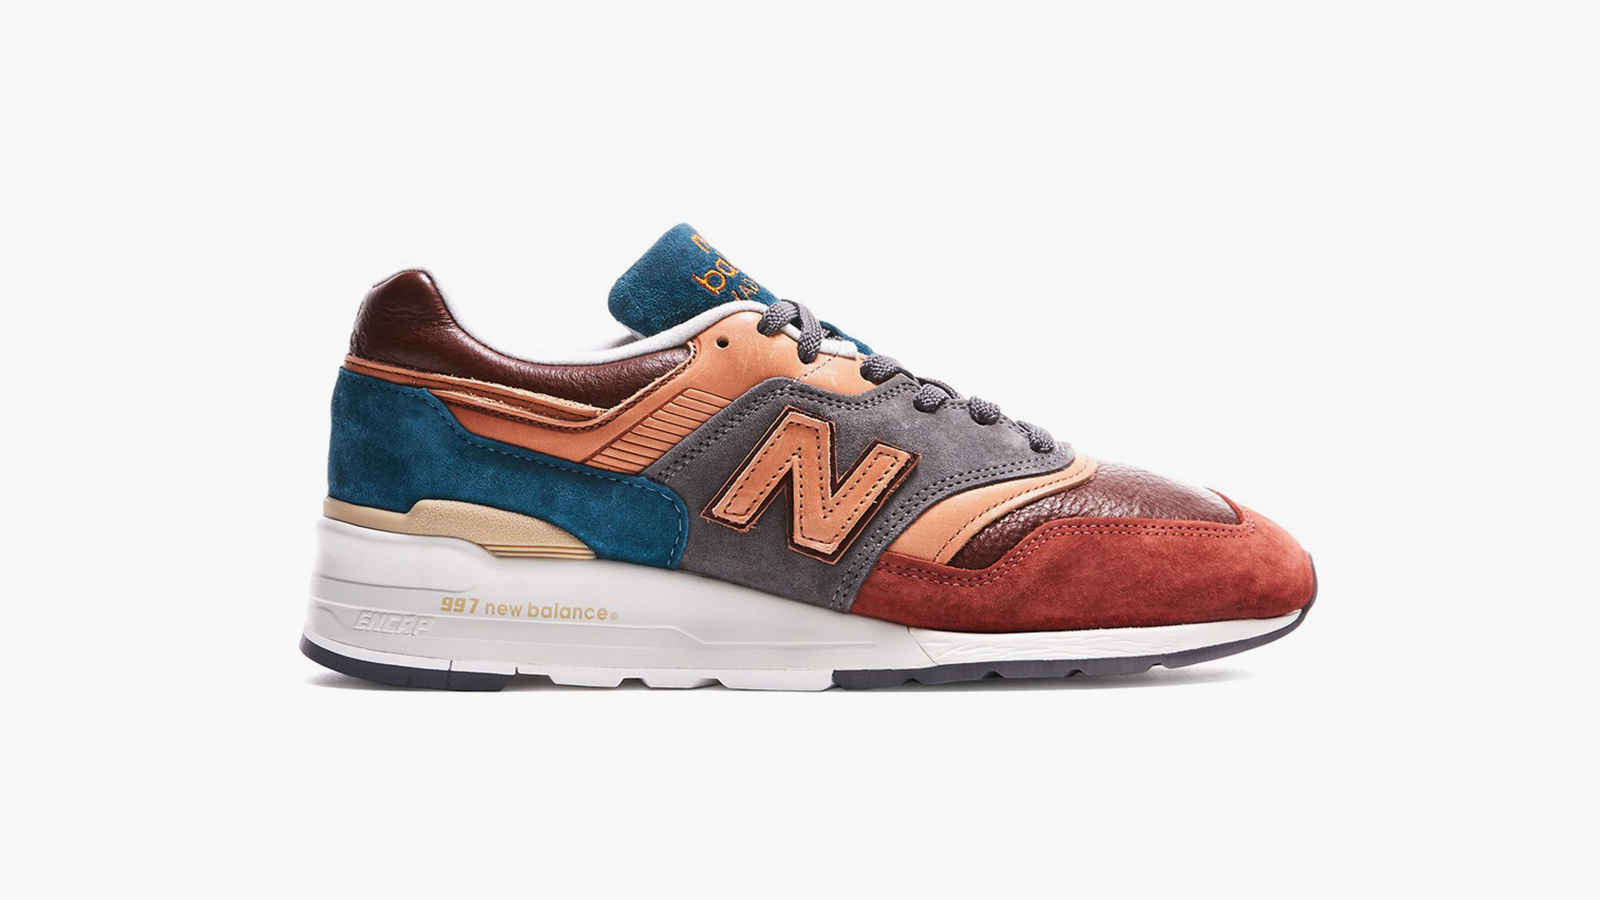 The Todd Snyder x New Balance 997 Were Inspired By Upstate NY - IMBOLDN